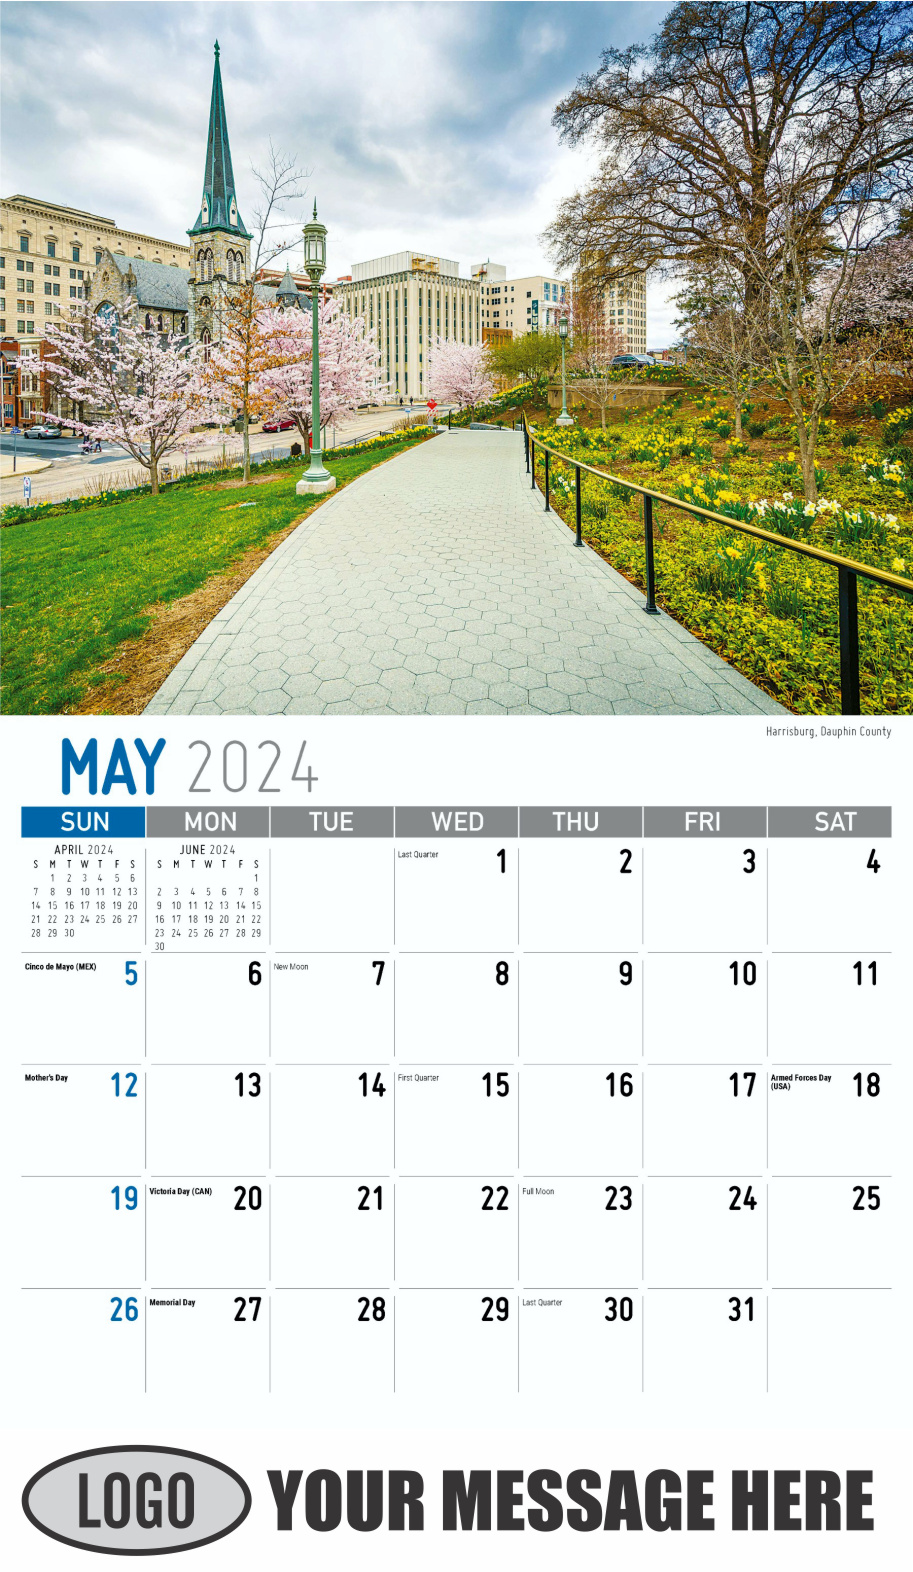 Scenes of Pennsylvania 2024 Business Promotion Calendar - May